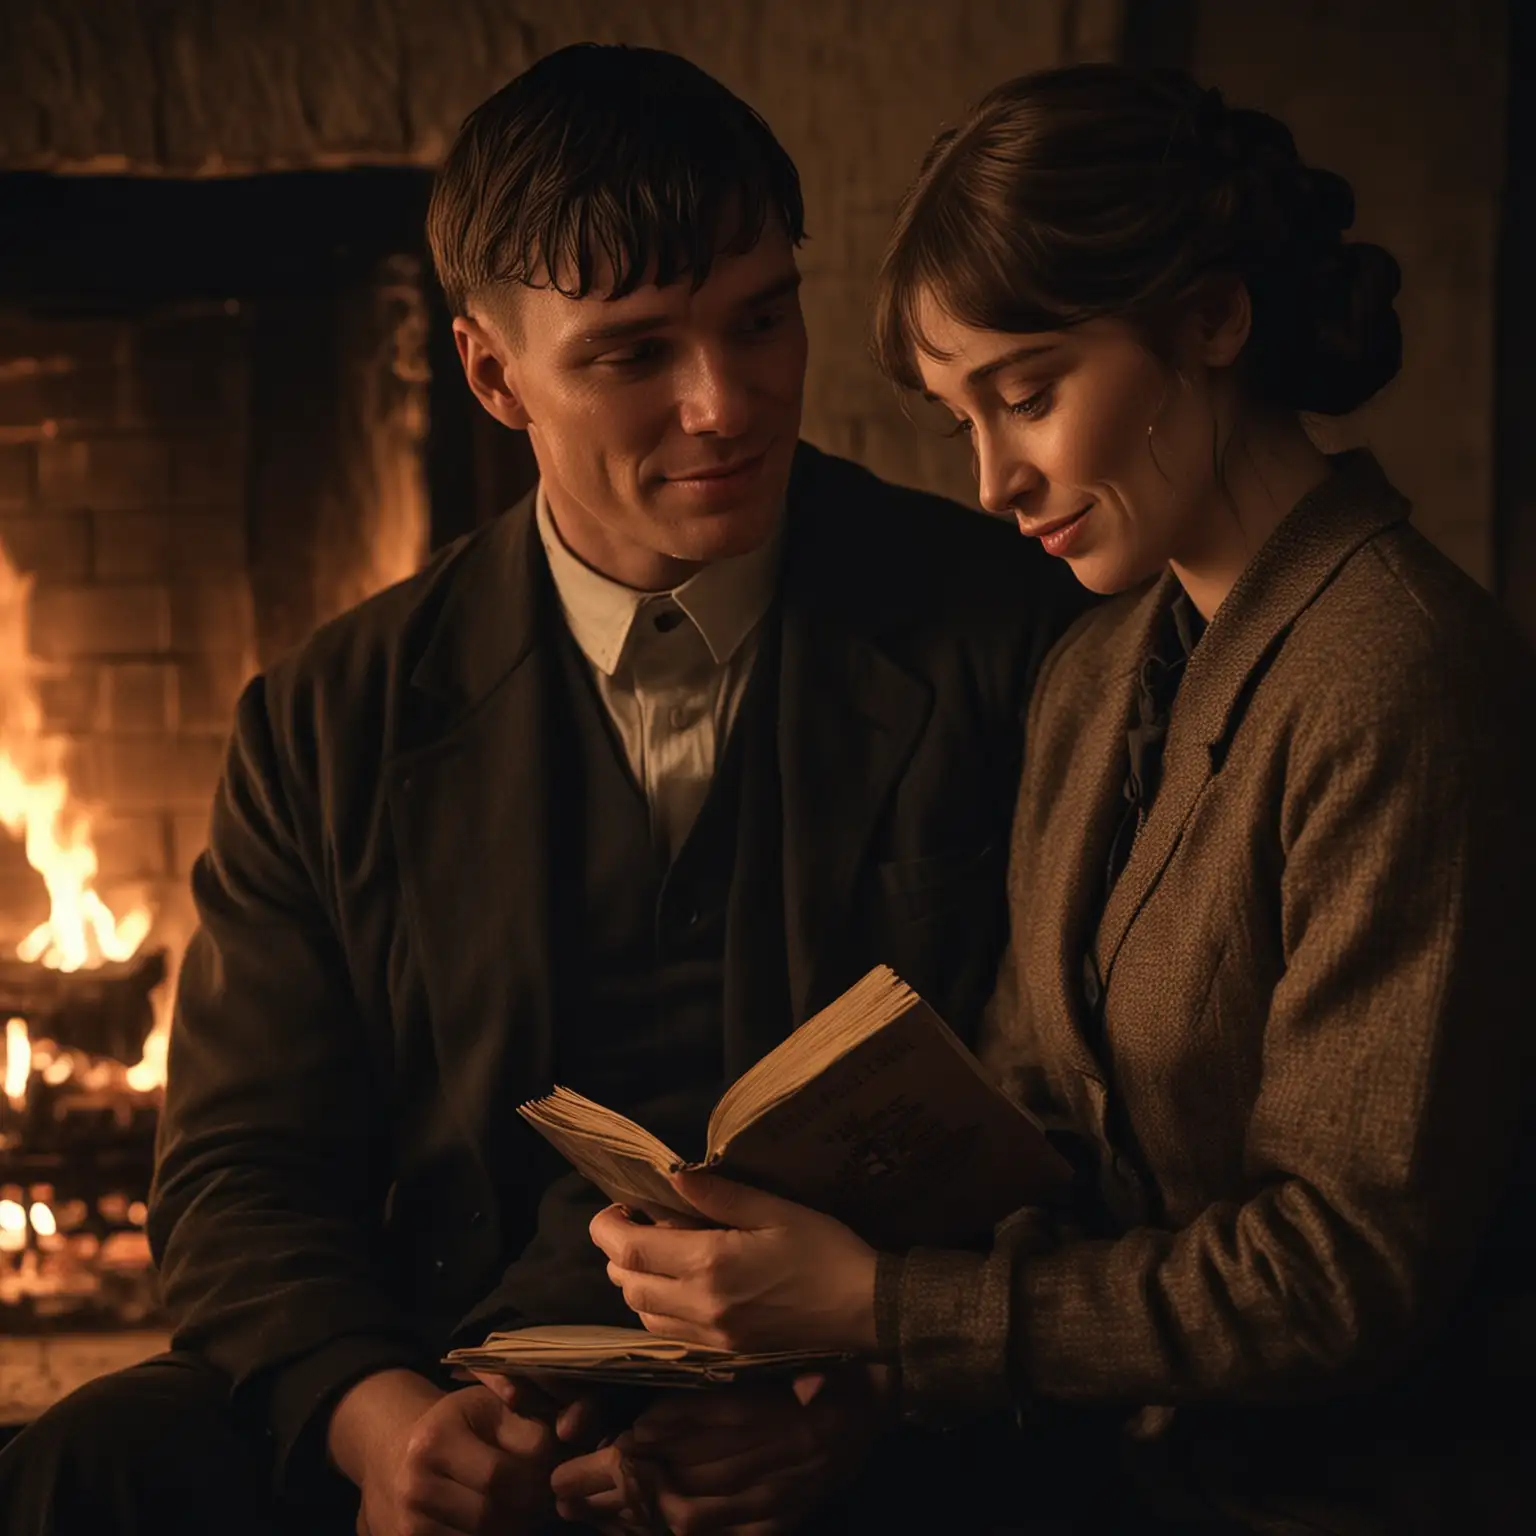 Tommy-Shelby-and-Lizzie-Shelby-by-Fireplace-Comfort-and-Vulnerability-in-a-Safe-Relationship